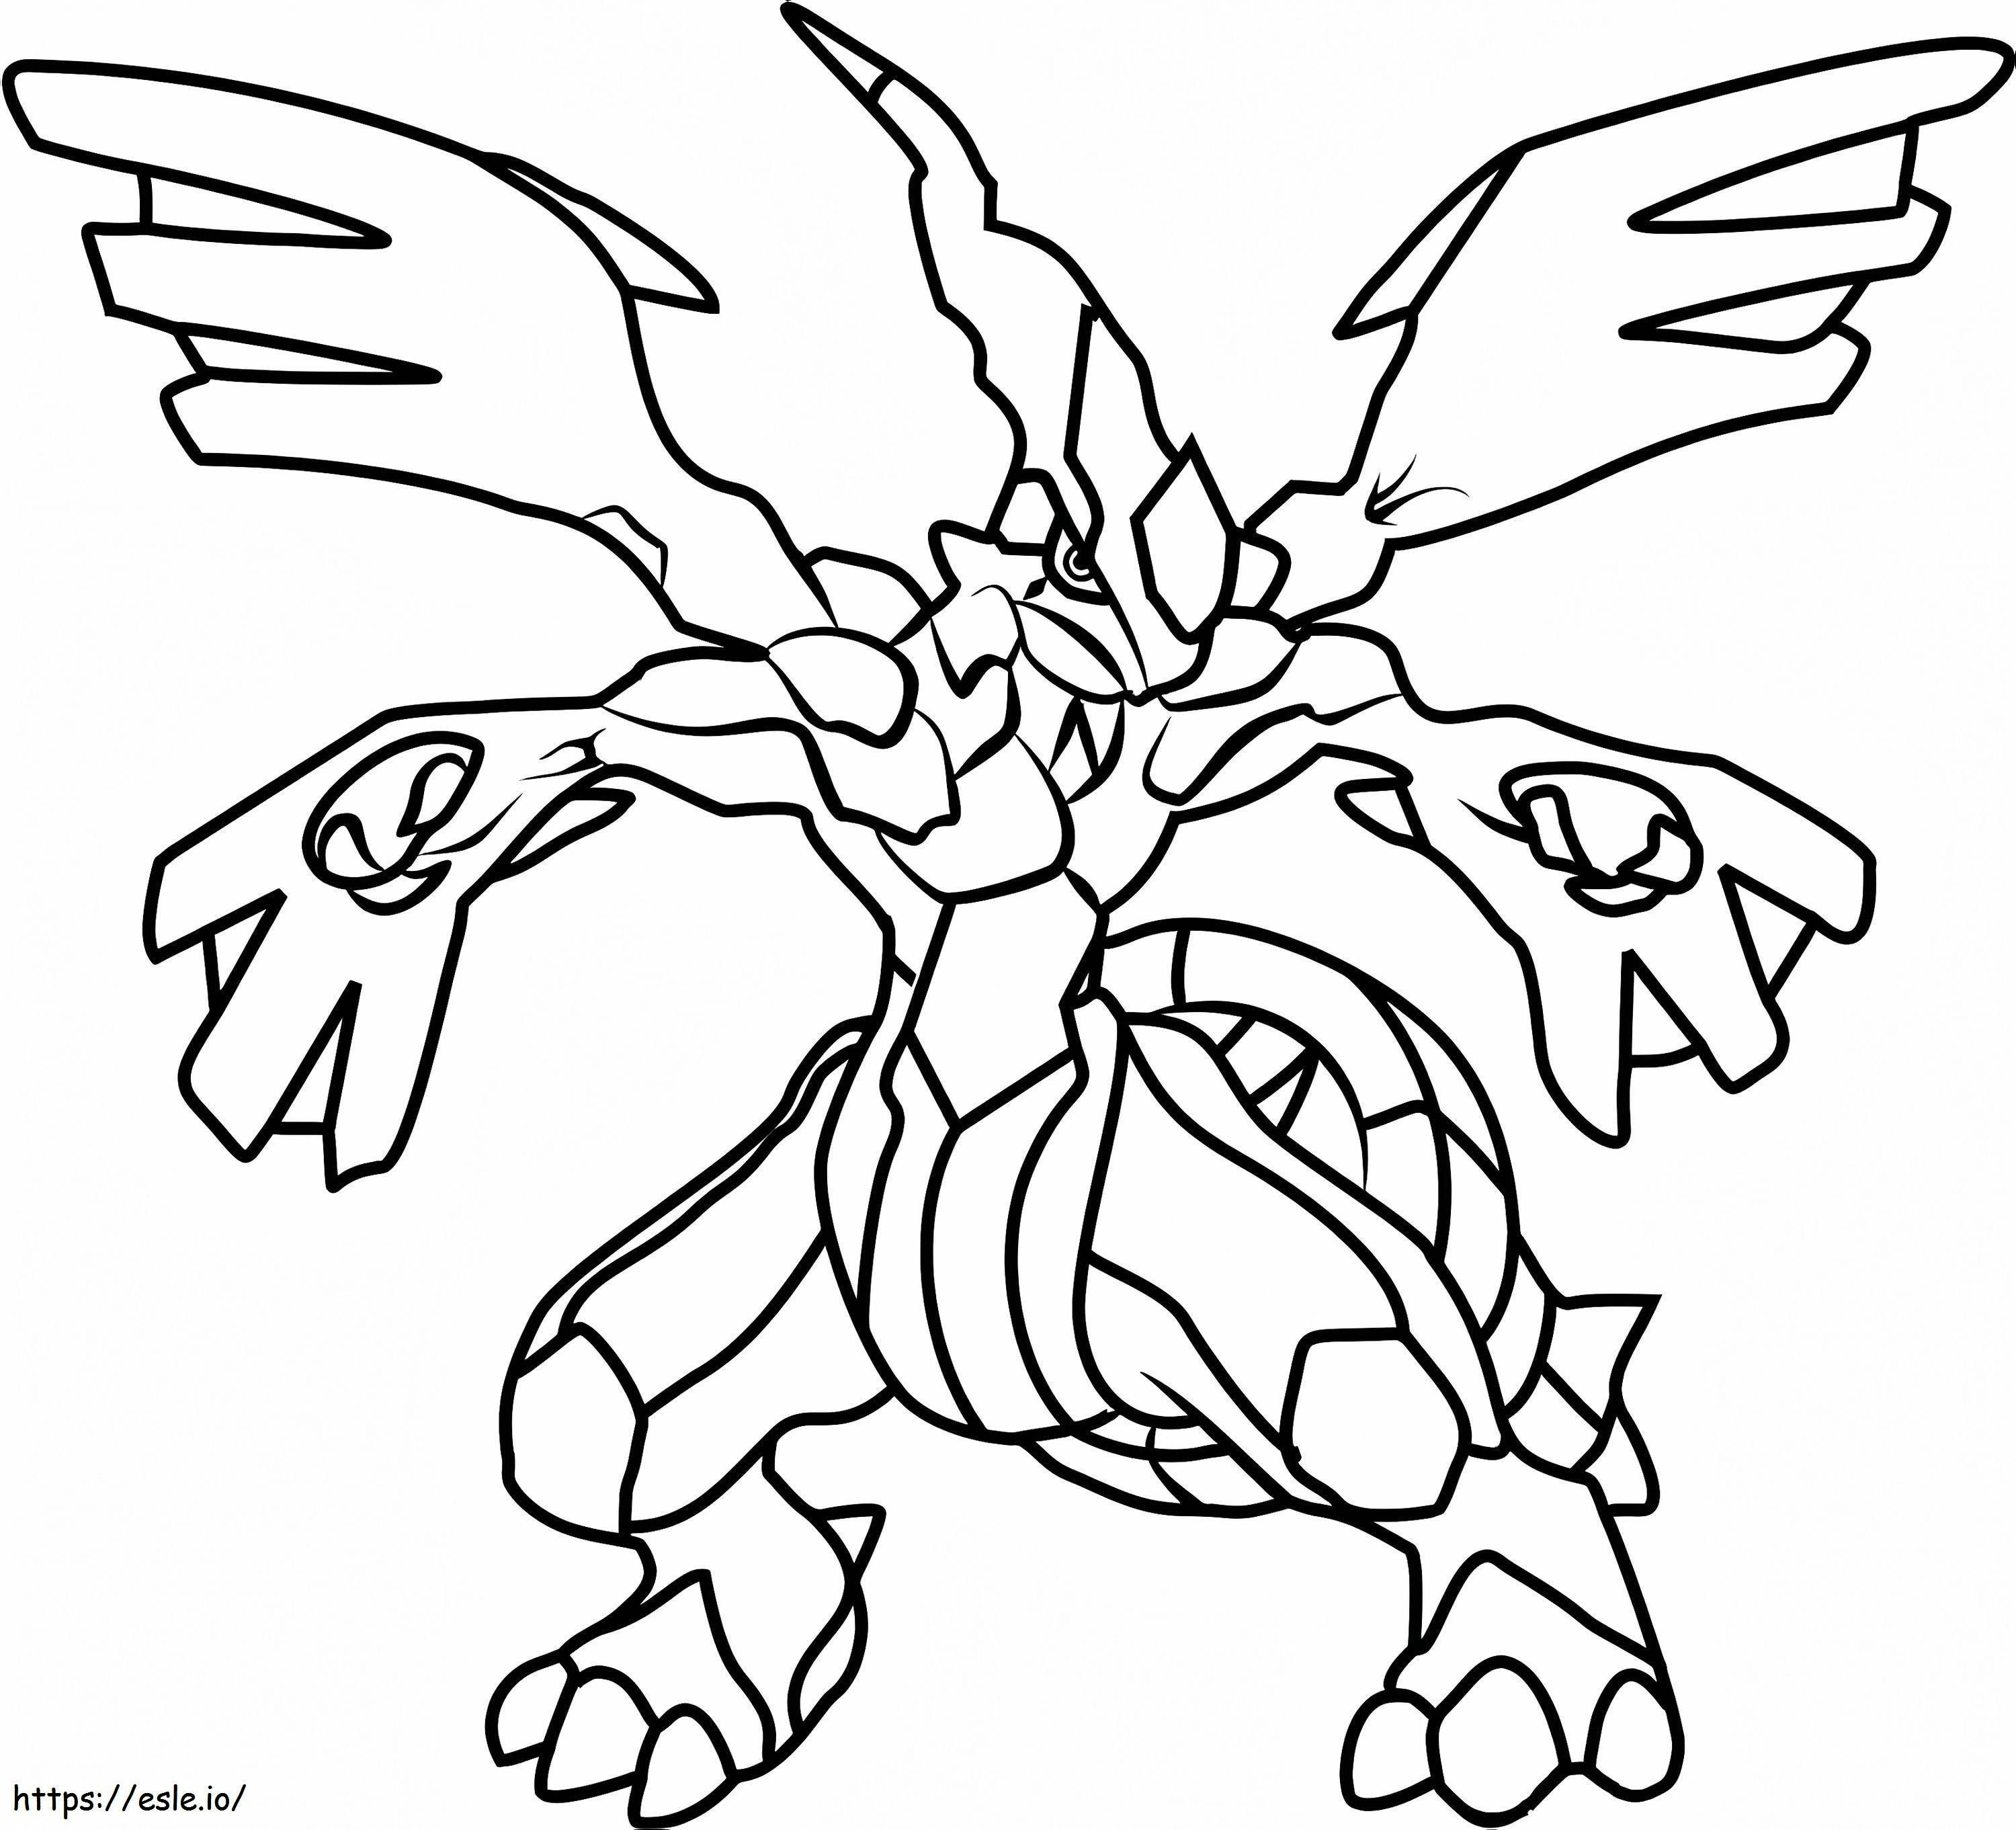 Cool Zekrom coloring page